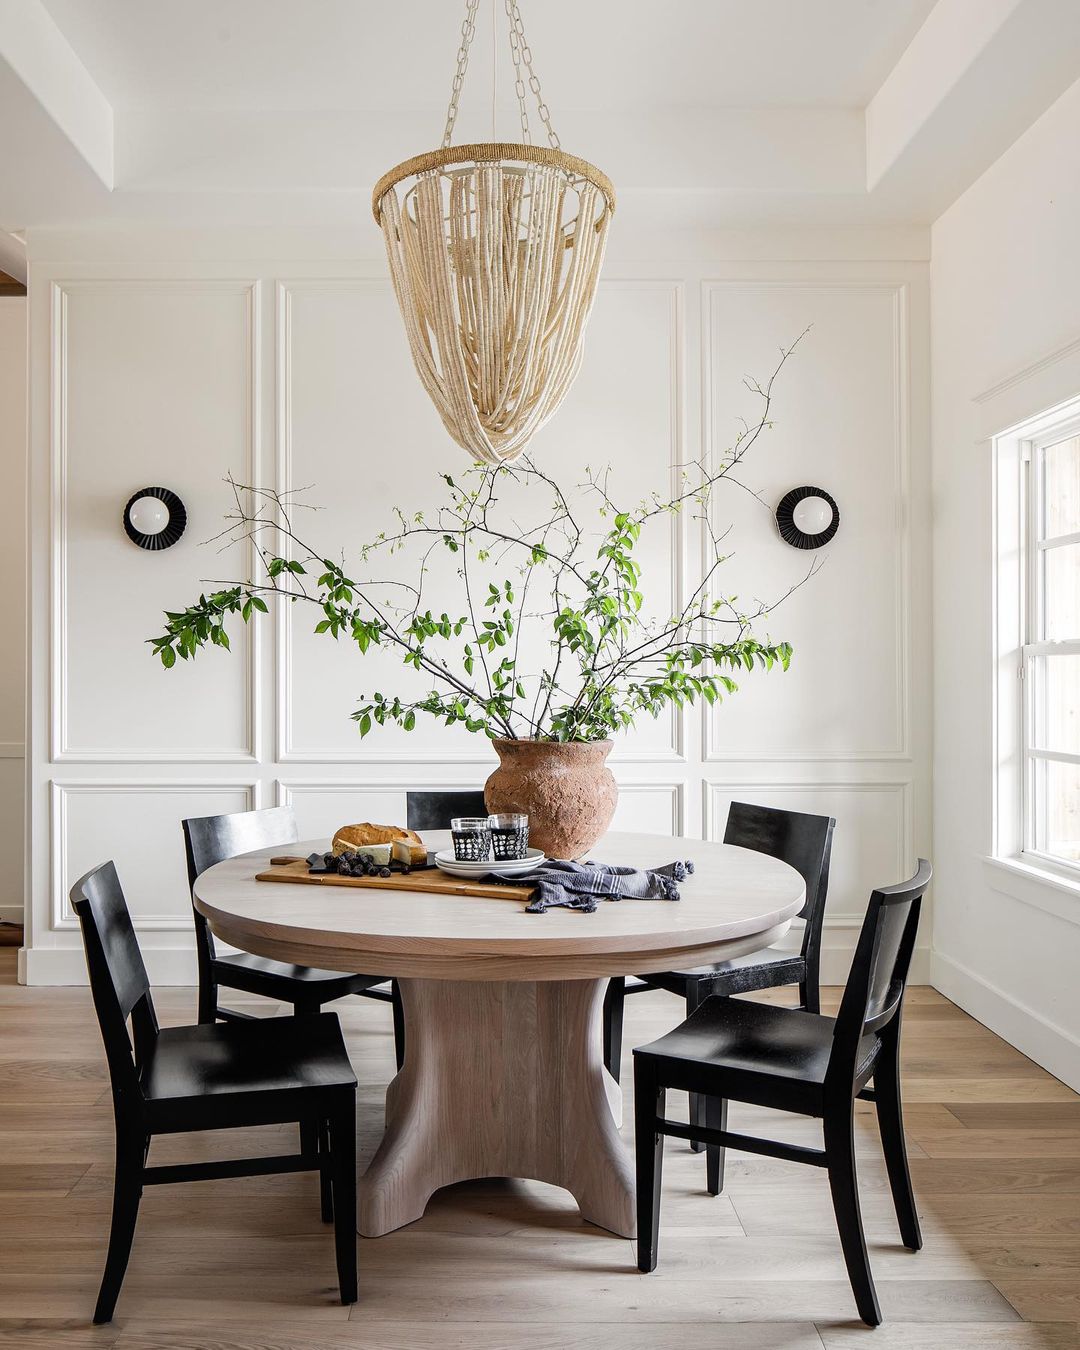 A beautiful modern dining room decorated with fresh branches, rustic pottery, a wood charcuterie board, a round dining table in light wood, and modern black side chairs - kelsey leigh design co.